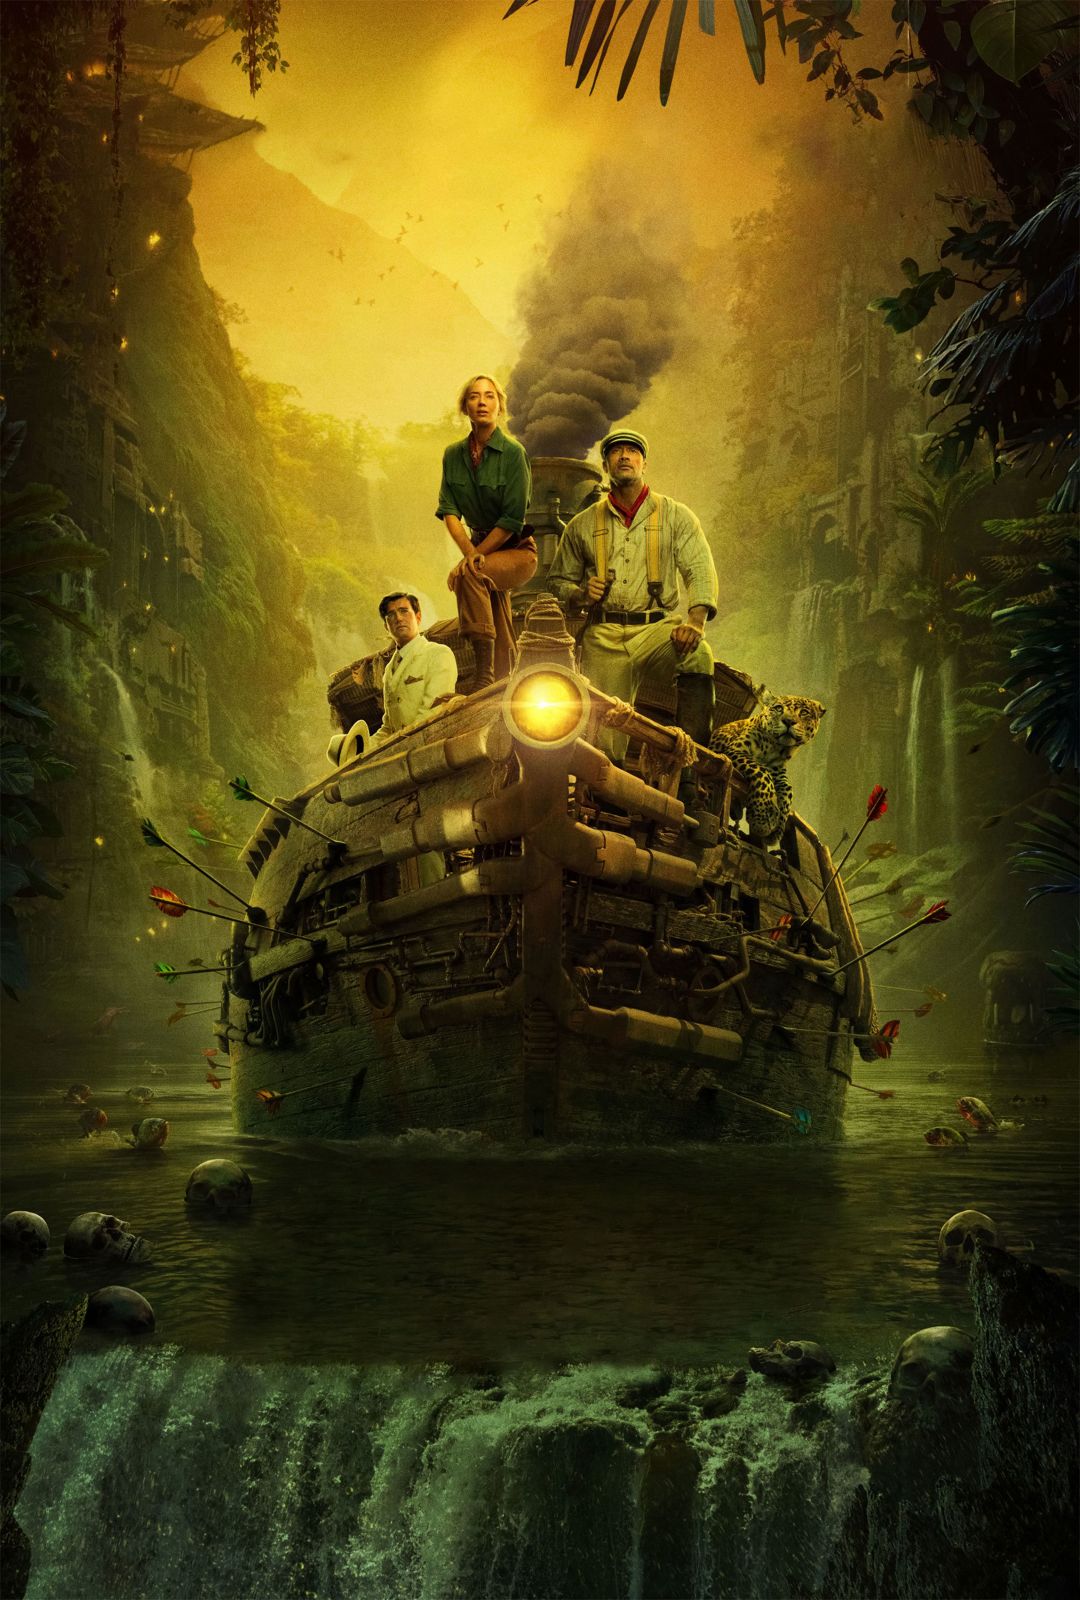 ✓[35+] Jungle Cruise 2020 Movie Wallpaper, HD Movies 4K Wallpaper - Android  / iPhone HD Wallpaper Background Download (png / jpg) (2023)